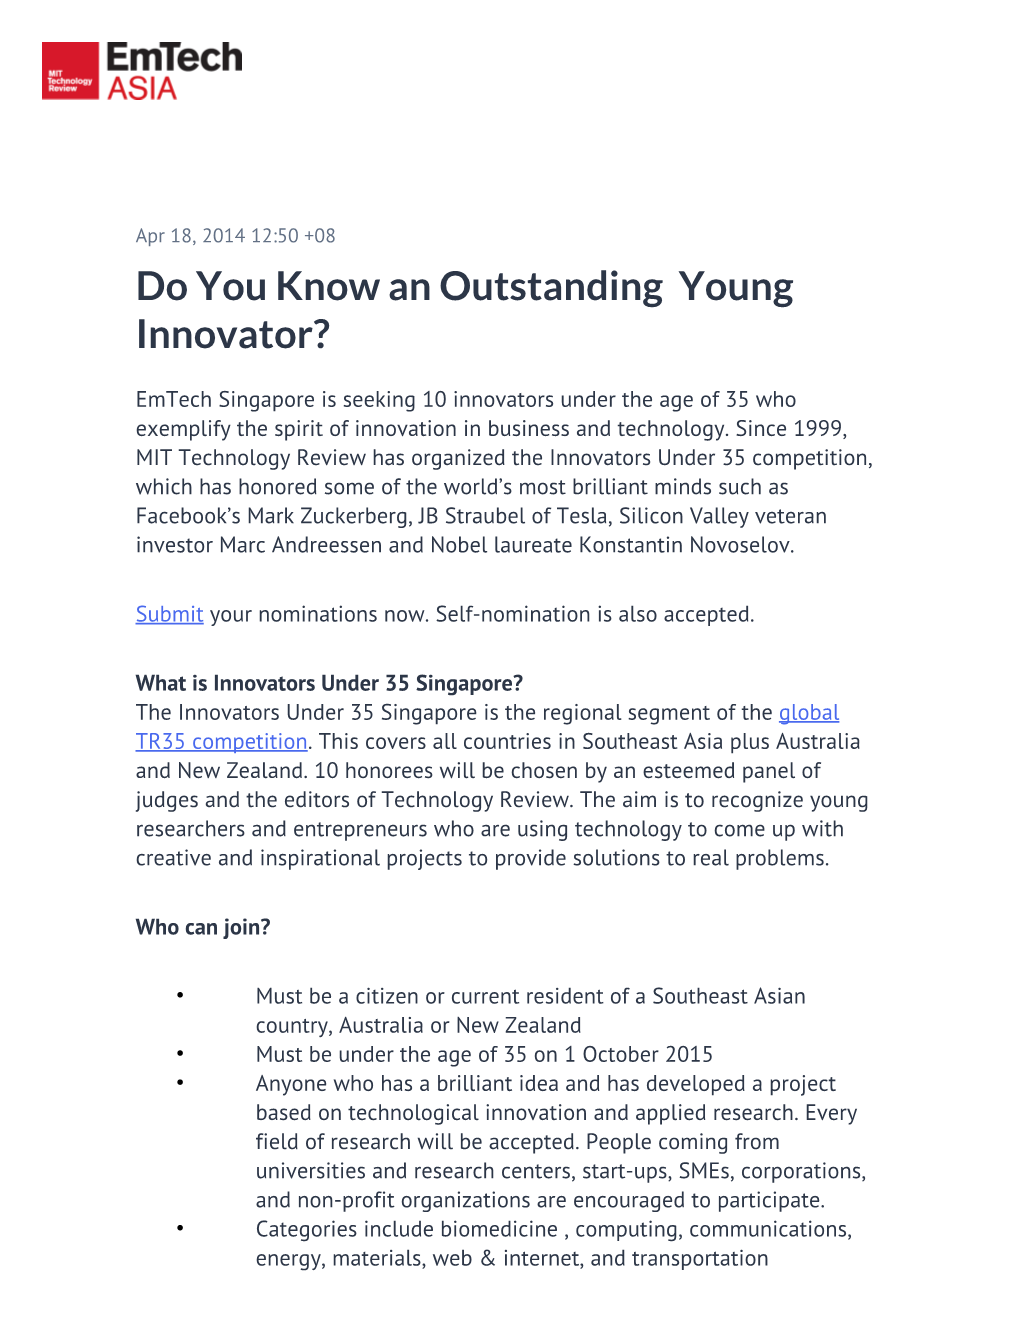 Do You Know an Outstanding Young Innovator?